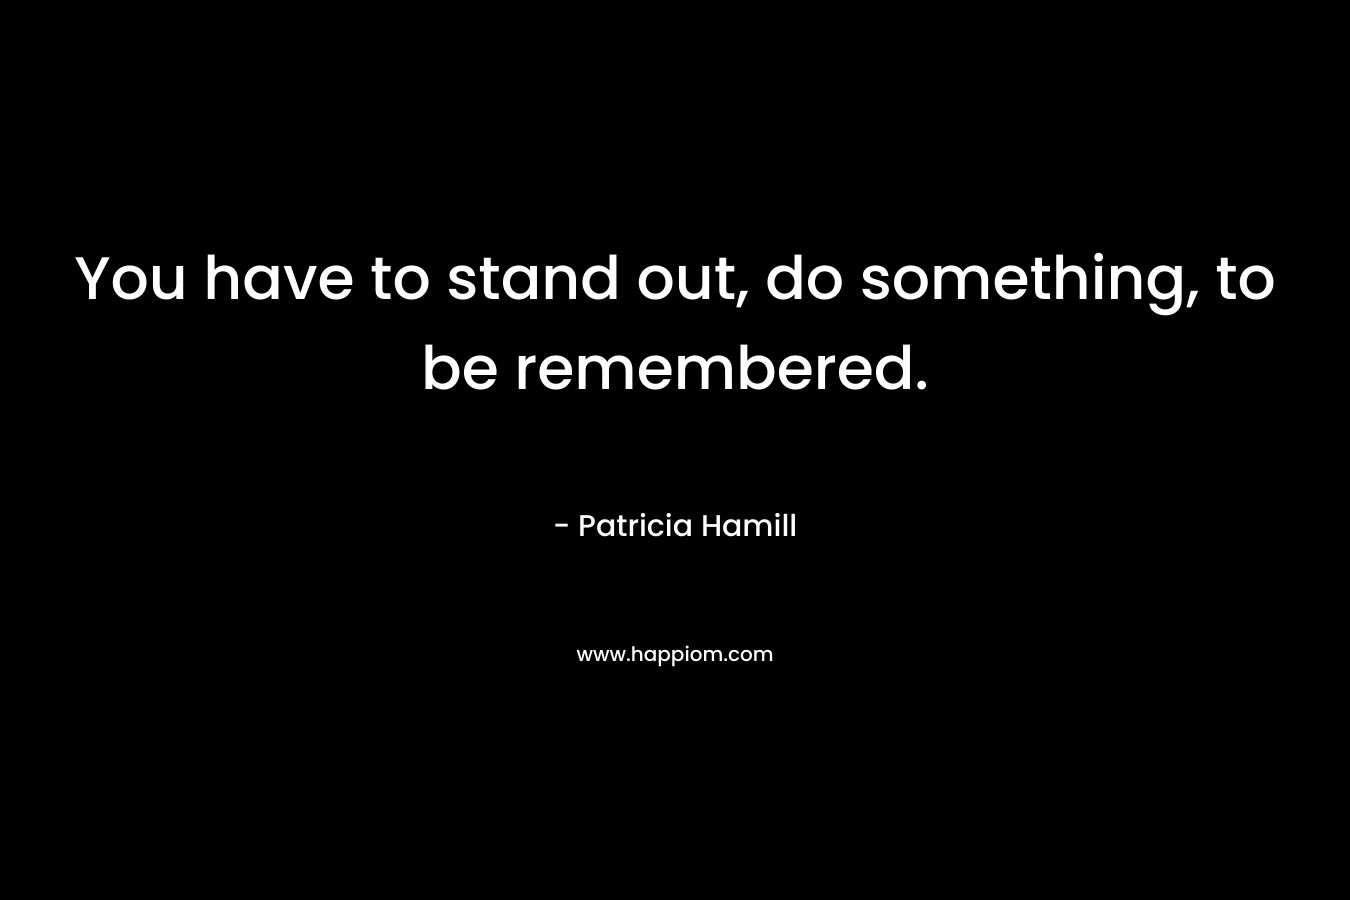 You have to stand out, do something, to be remembered.